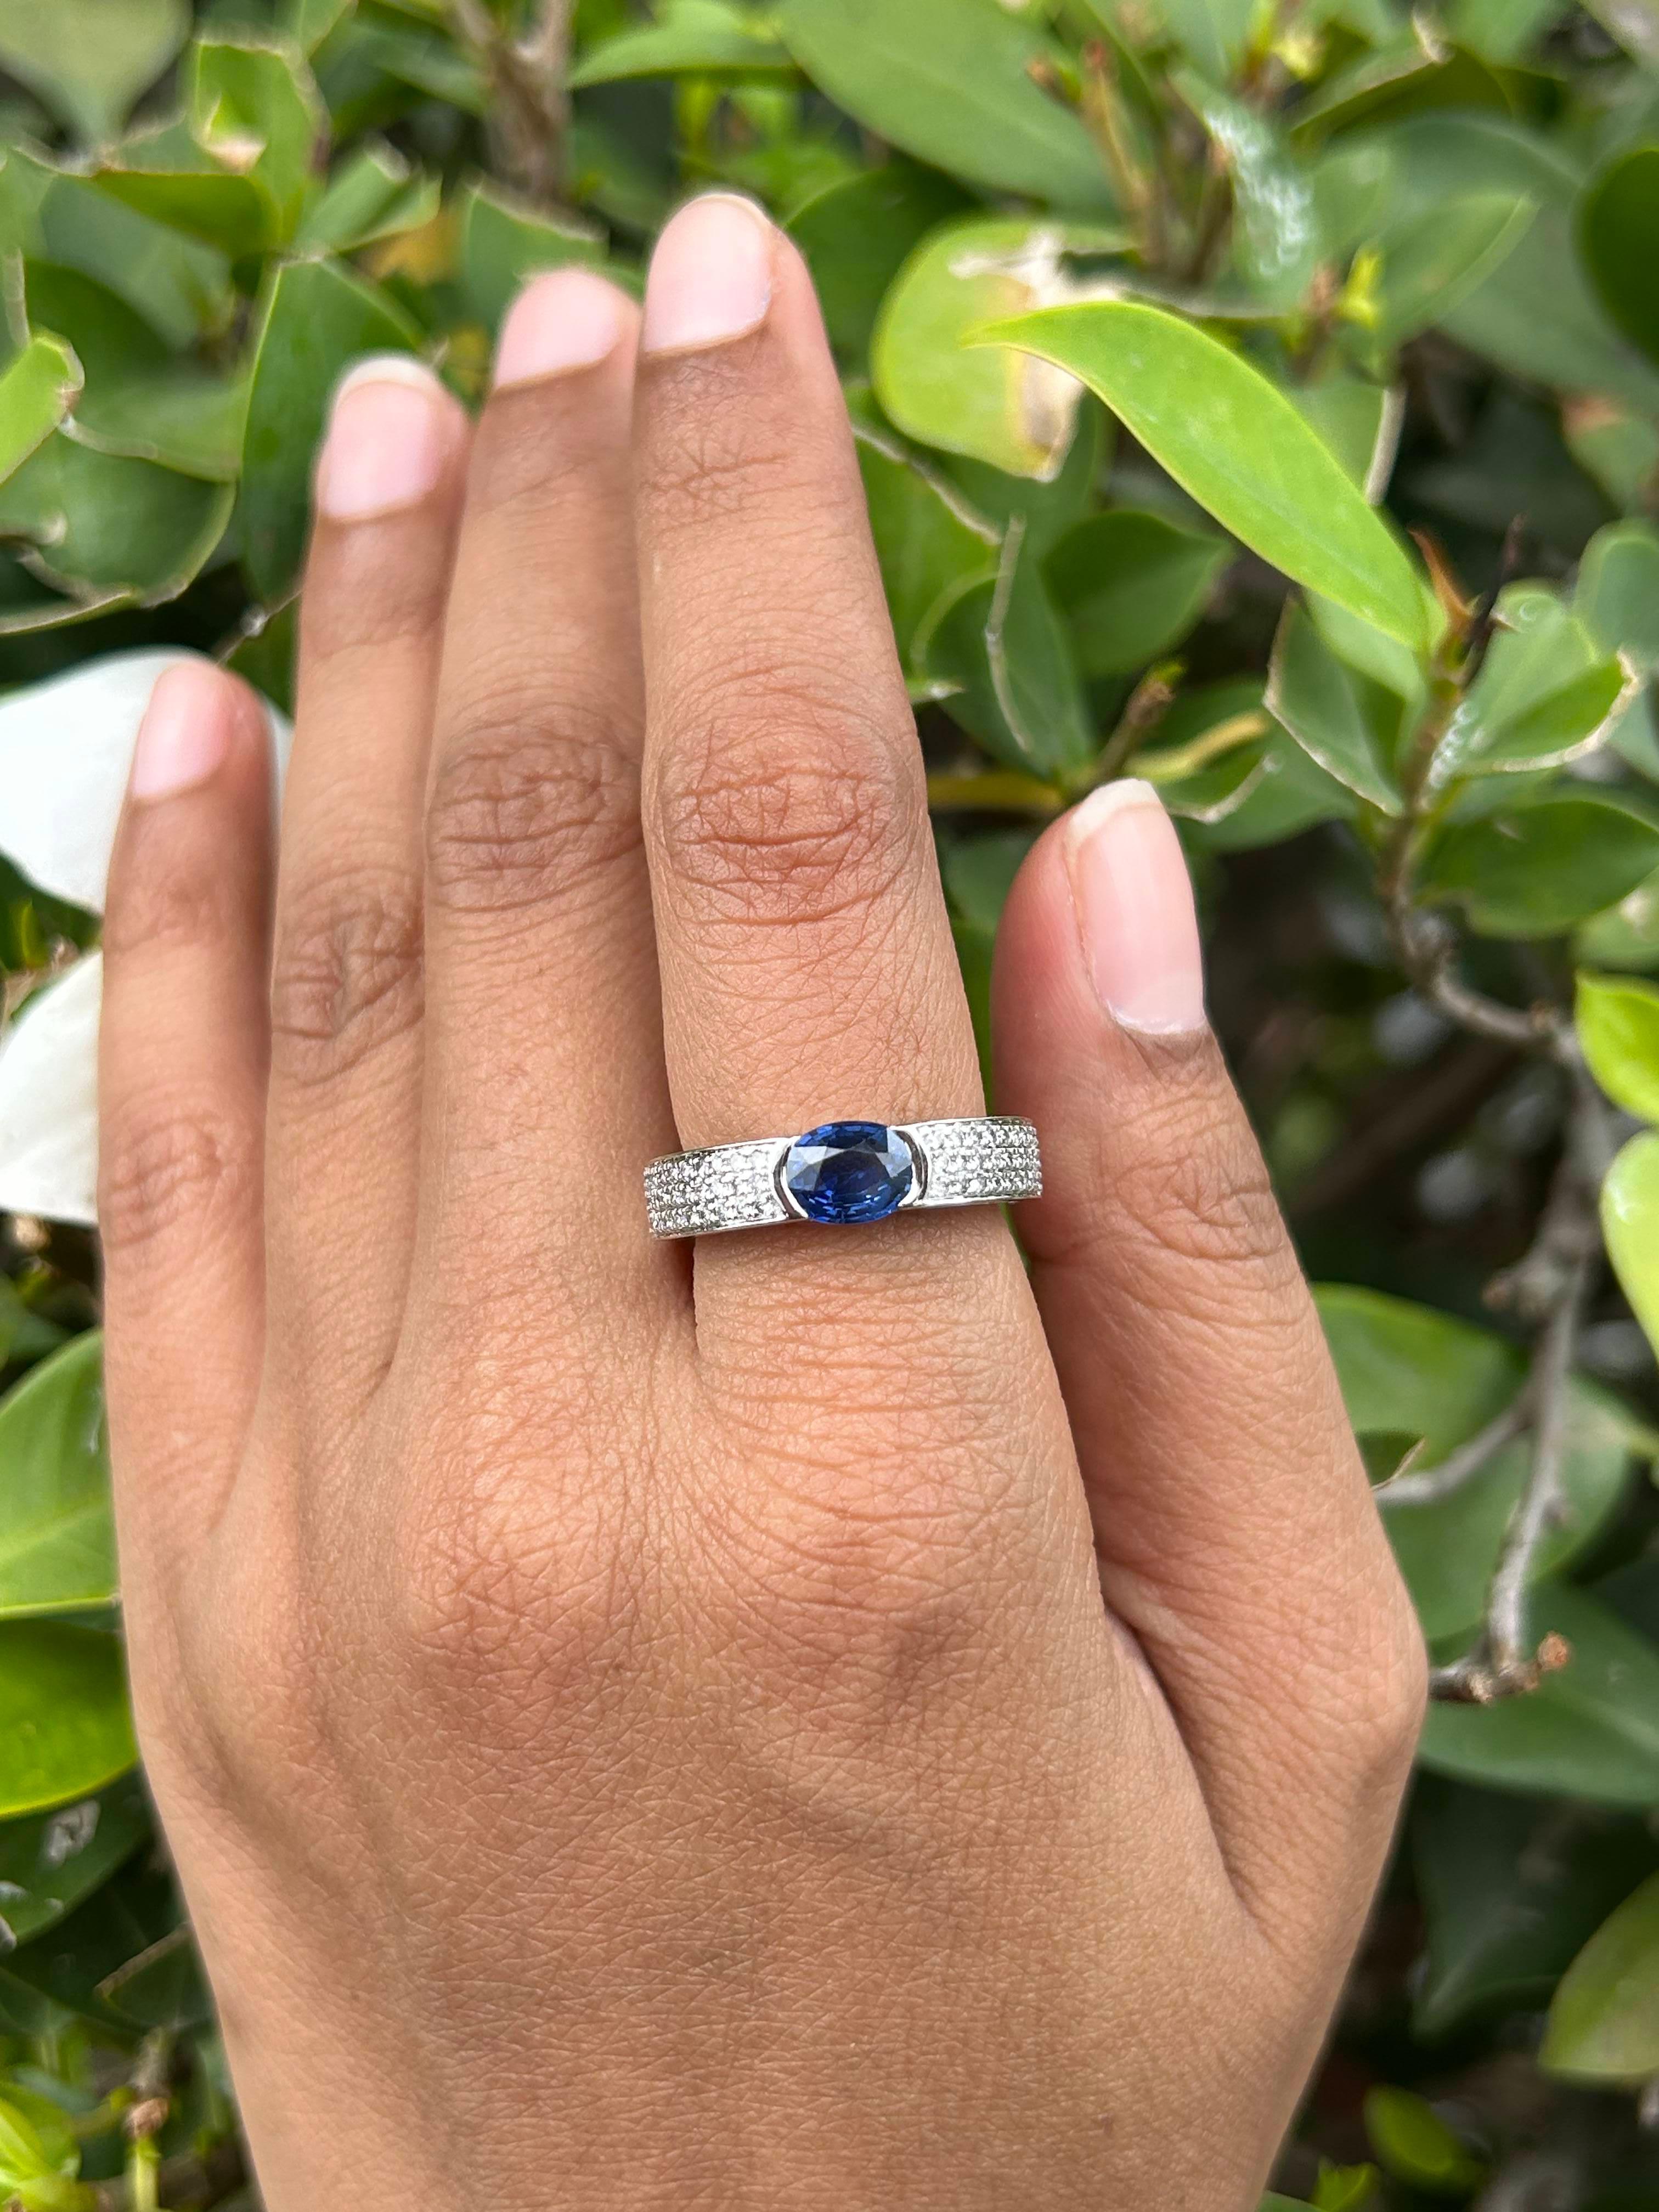 For Sale:  Unisex Blue Sapphire Diamond Engagement Band Ring in 18k Solid White Gold 8